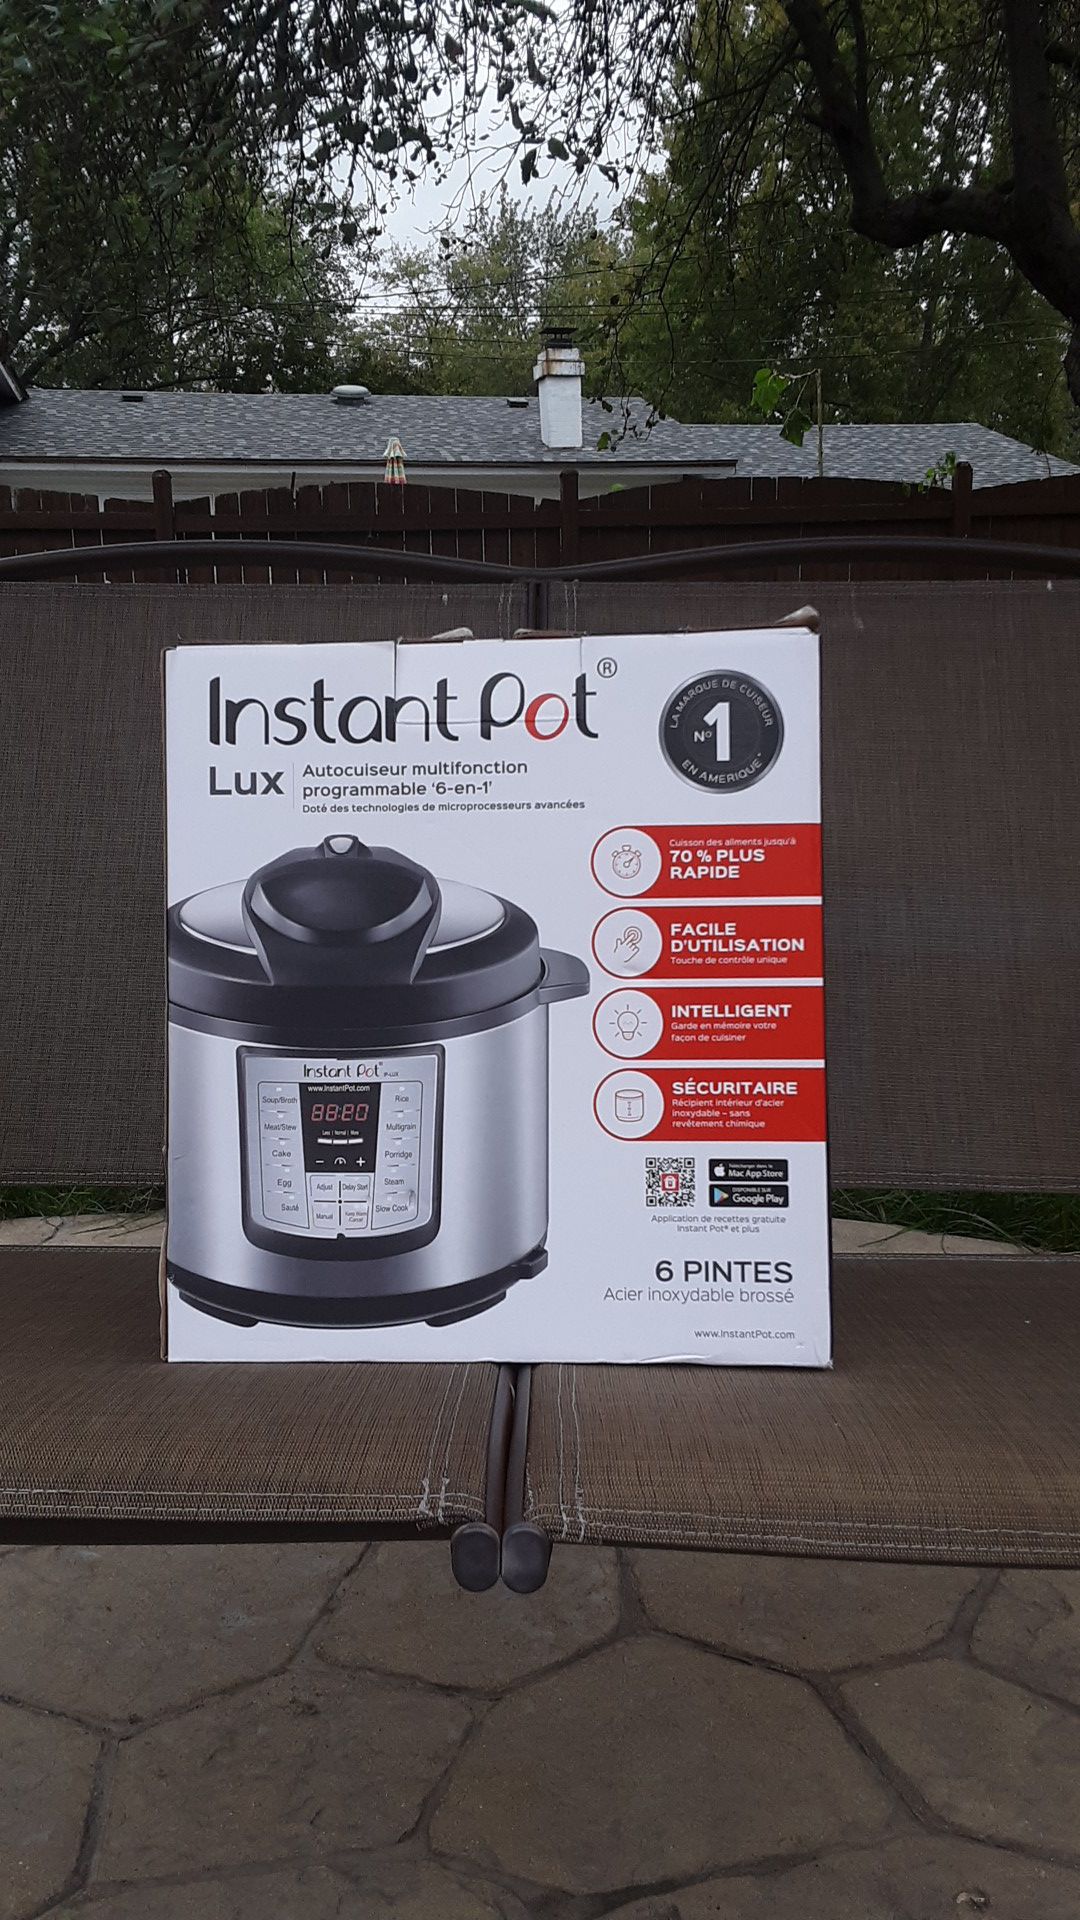 Instant pot 6 pintes Lux 6in 1